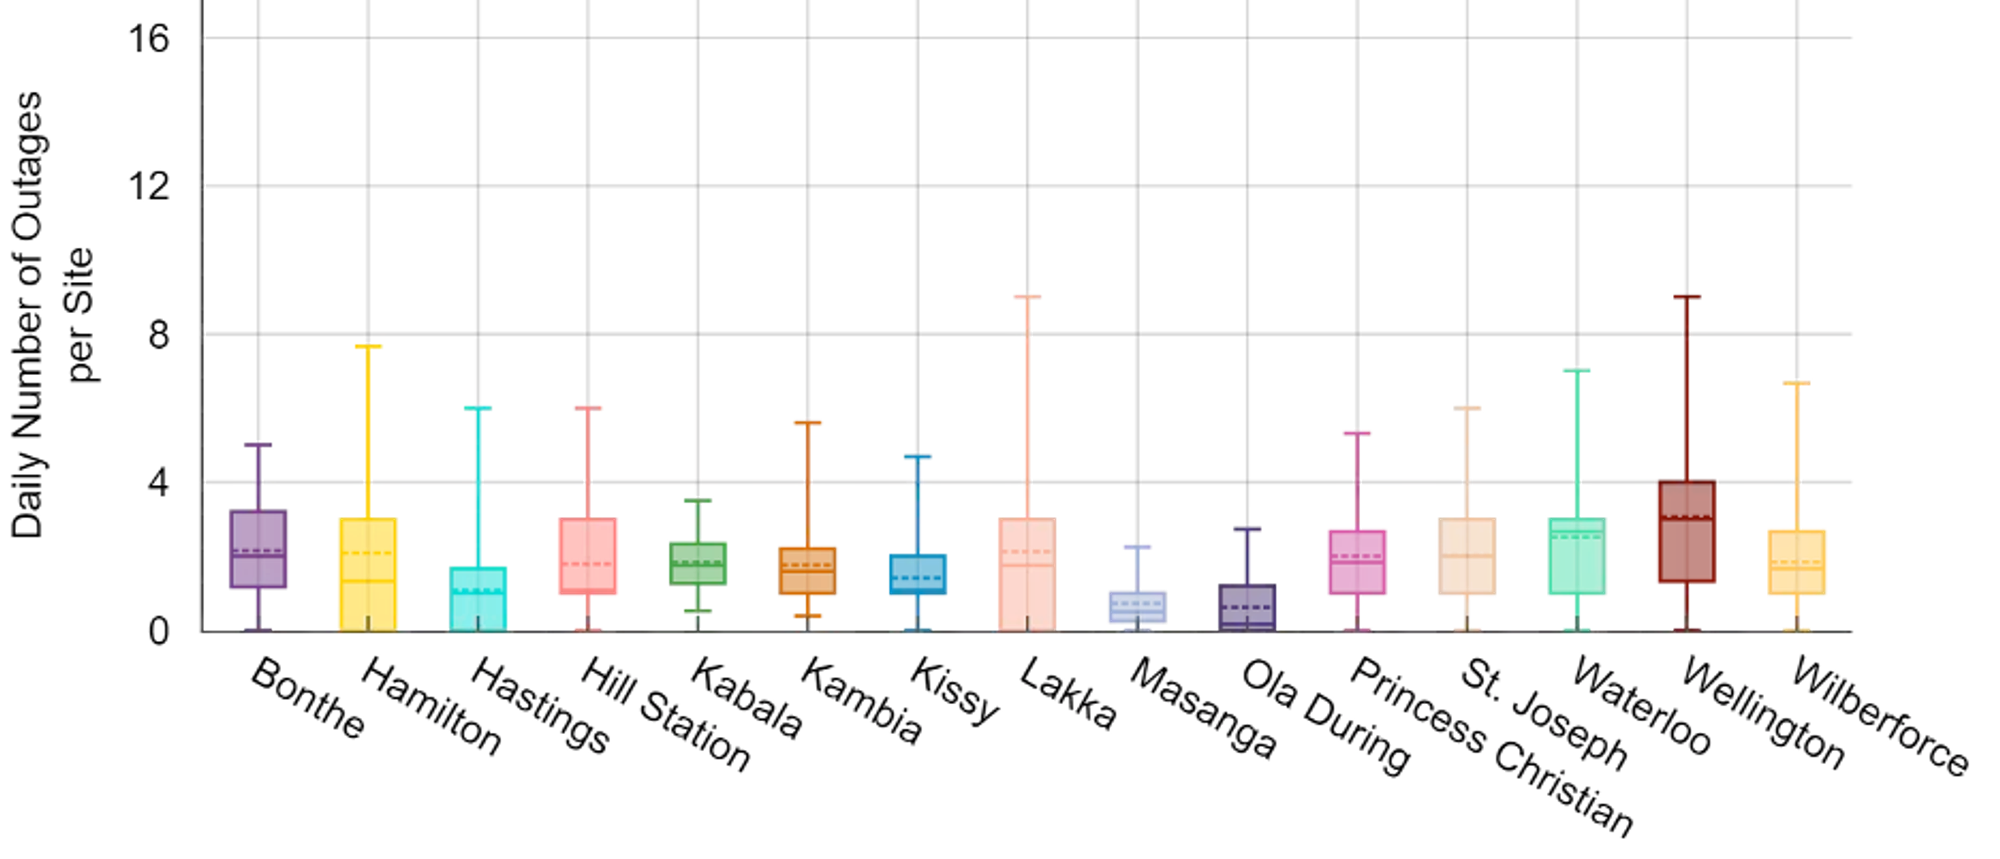 Figure 2: Average daily frequency of power outages (July 20 – August 31, 2023). This box plot illustrates the average daily frequency of power outages at the 15 health facilities. Each box shows the middle 50% of data for outages, with the median indicated by the line inside. The "whiskers" show the typical range, excluding outliers. The plot reveals significant differences in power stability across facilities: some, like "Hill Station," have fewer outages, suggesting reliable power, while others, such as "Wellington," experience more frequent disruptions, indicating less reliable power supply.
